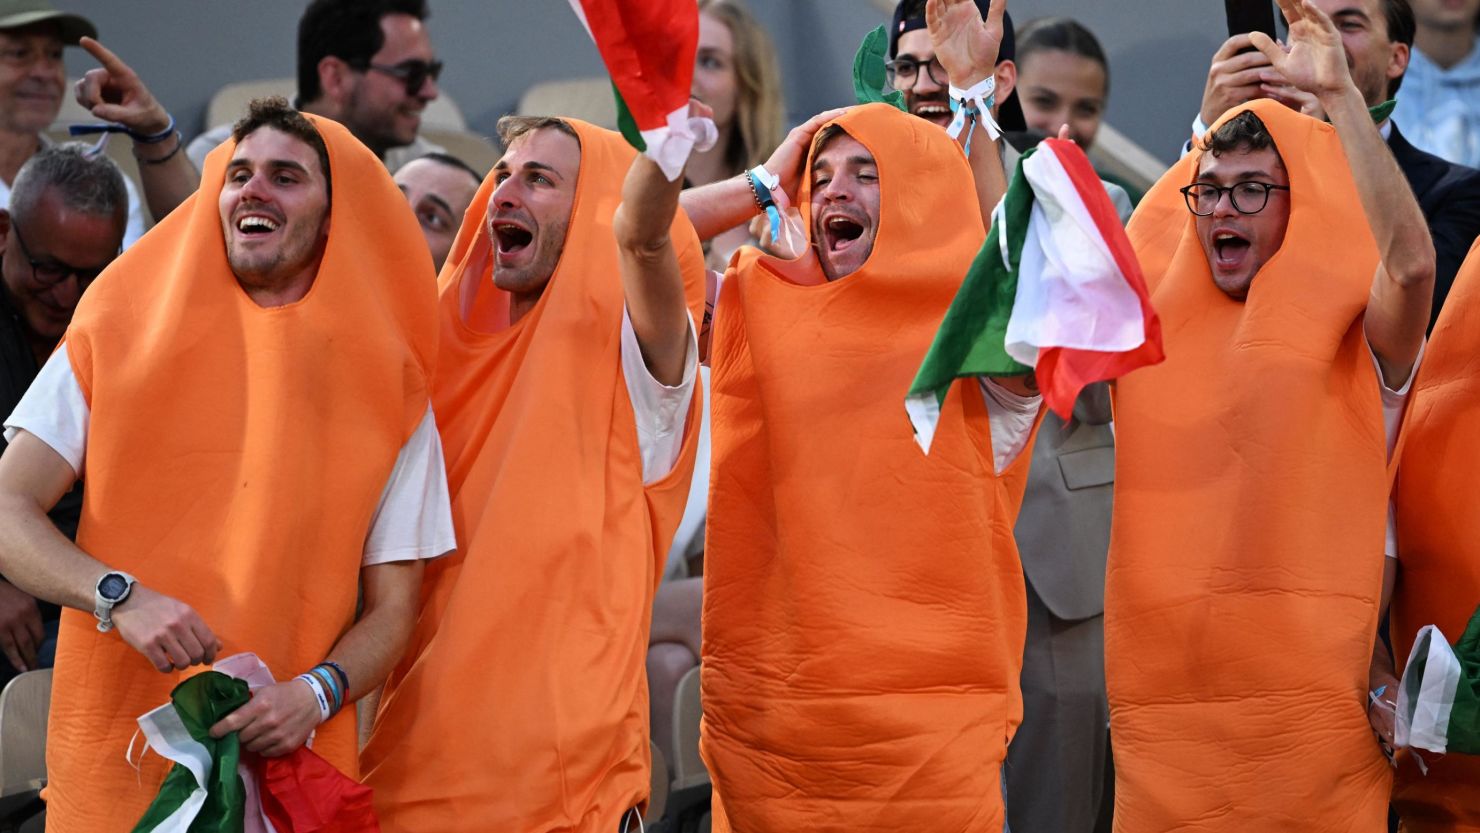 TOPSHOT - Fans of Italy's Jannik Sinner, dressed as carrots, gestures during his men's singles match against France's Alexandre Muller on day two of the Roland-Garros Open tennis tournament at the Court Philippe-Chatrier in Paris on May 29, 2023. (Photo by Emmanuel DUNAND / AFP) (Photo by EMMANUEL DUNAND/AFP via Getty Images)